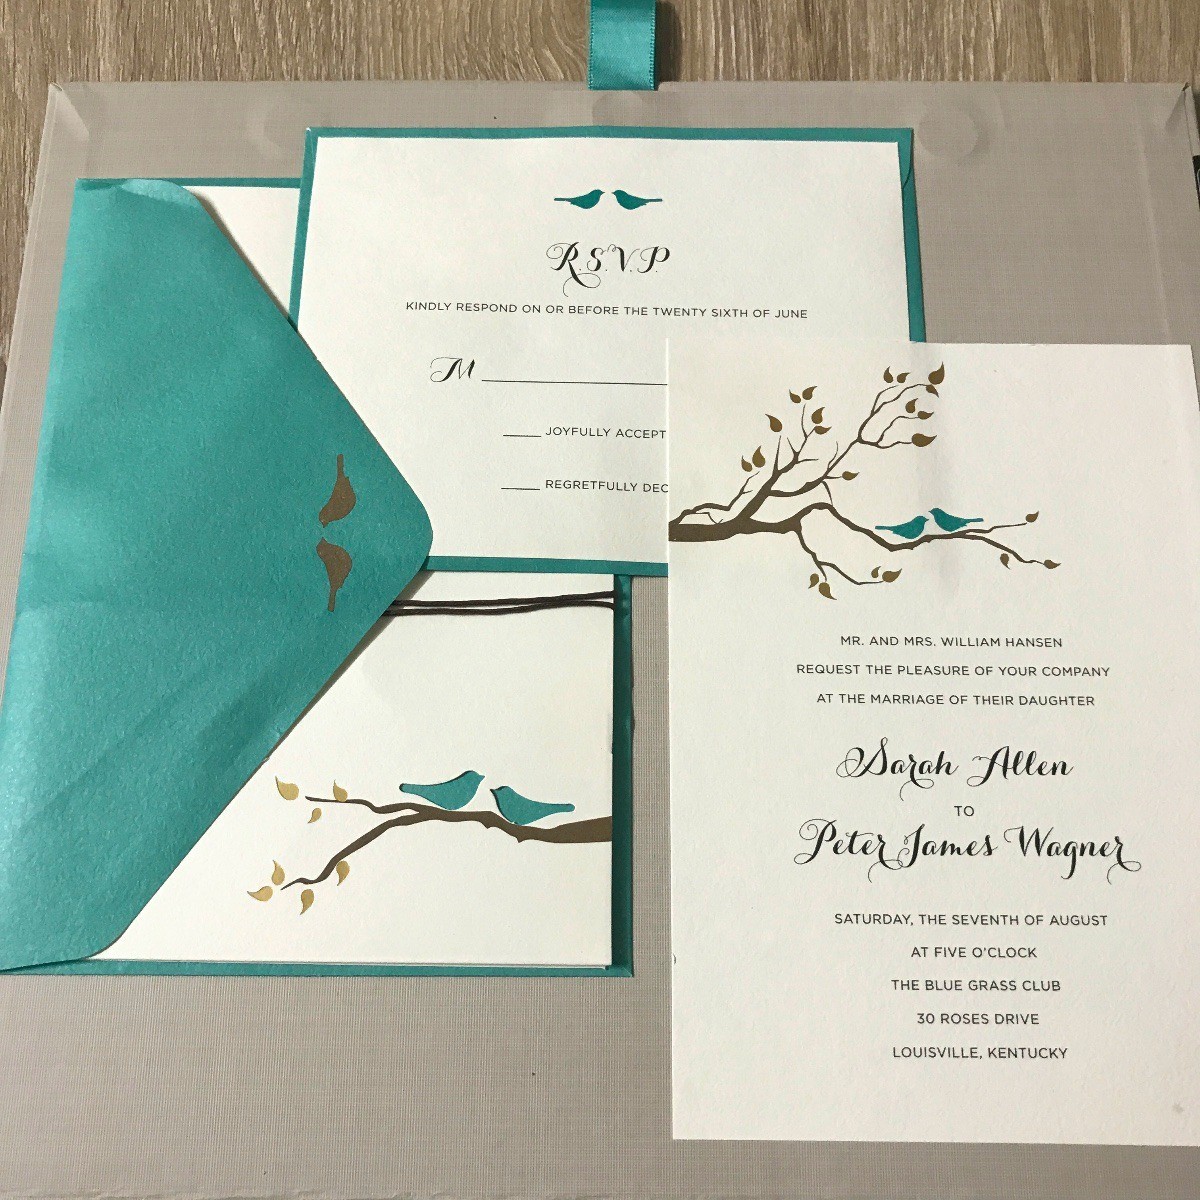 Using a Printable Kit for Wedding Invitations | ThriftyFun